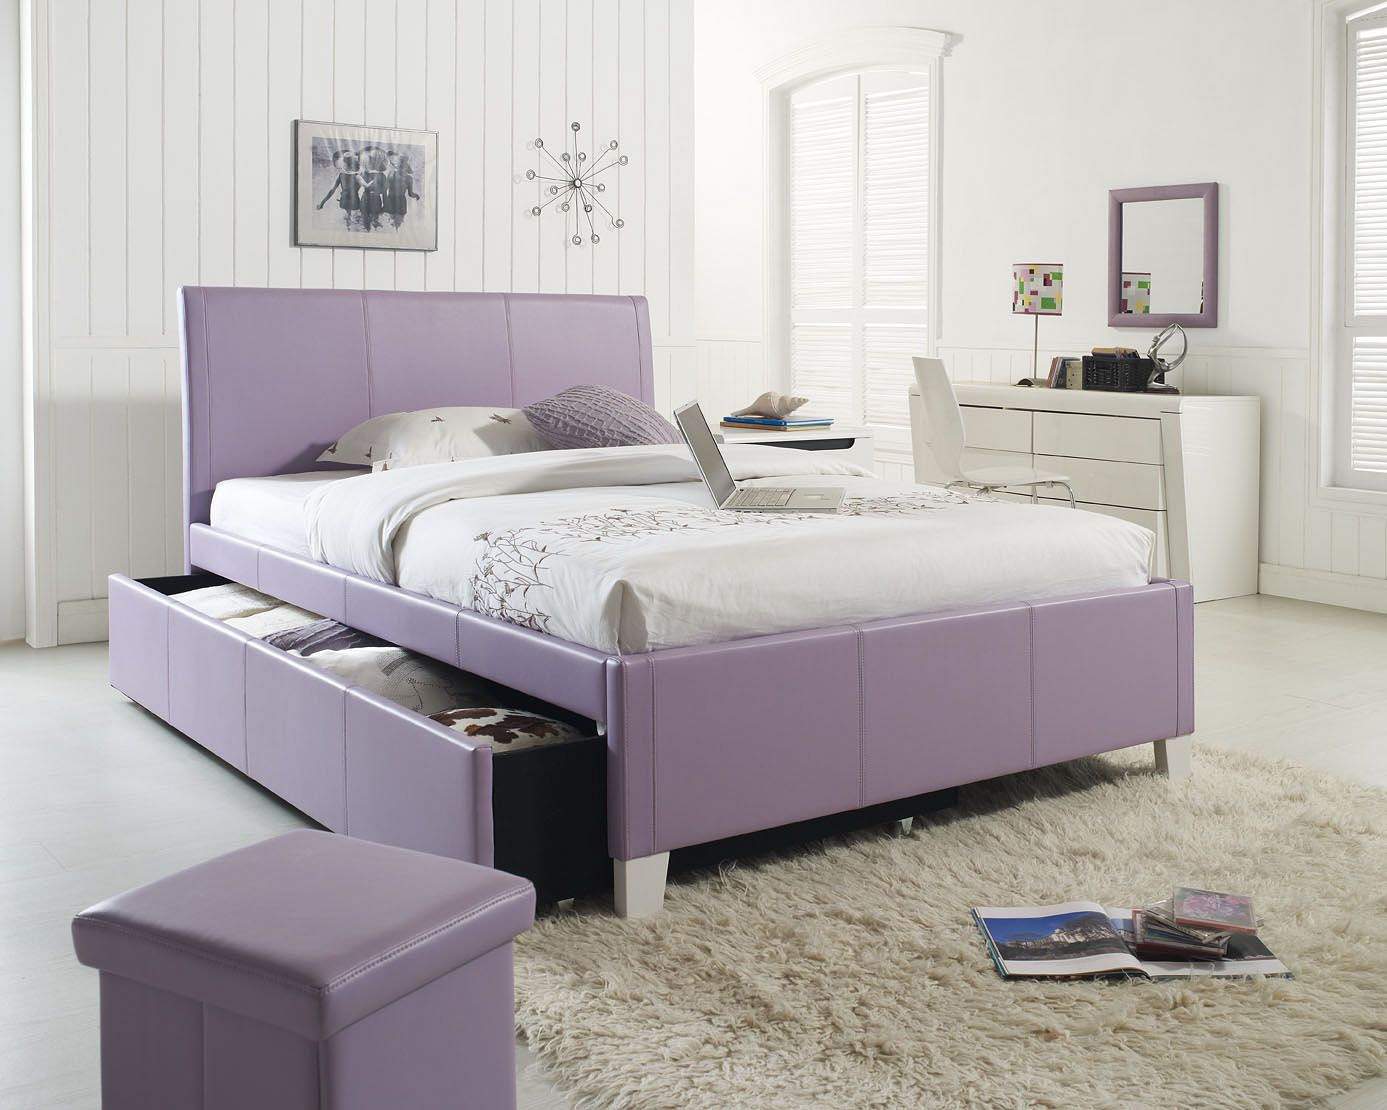 kids bedroom furniture for less photo - 10